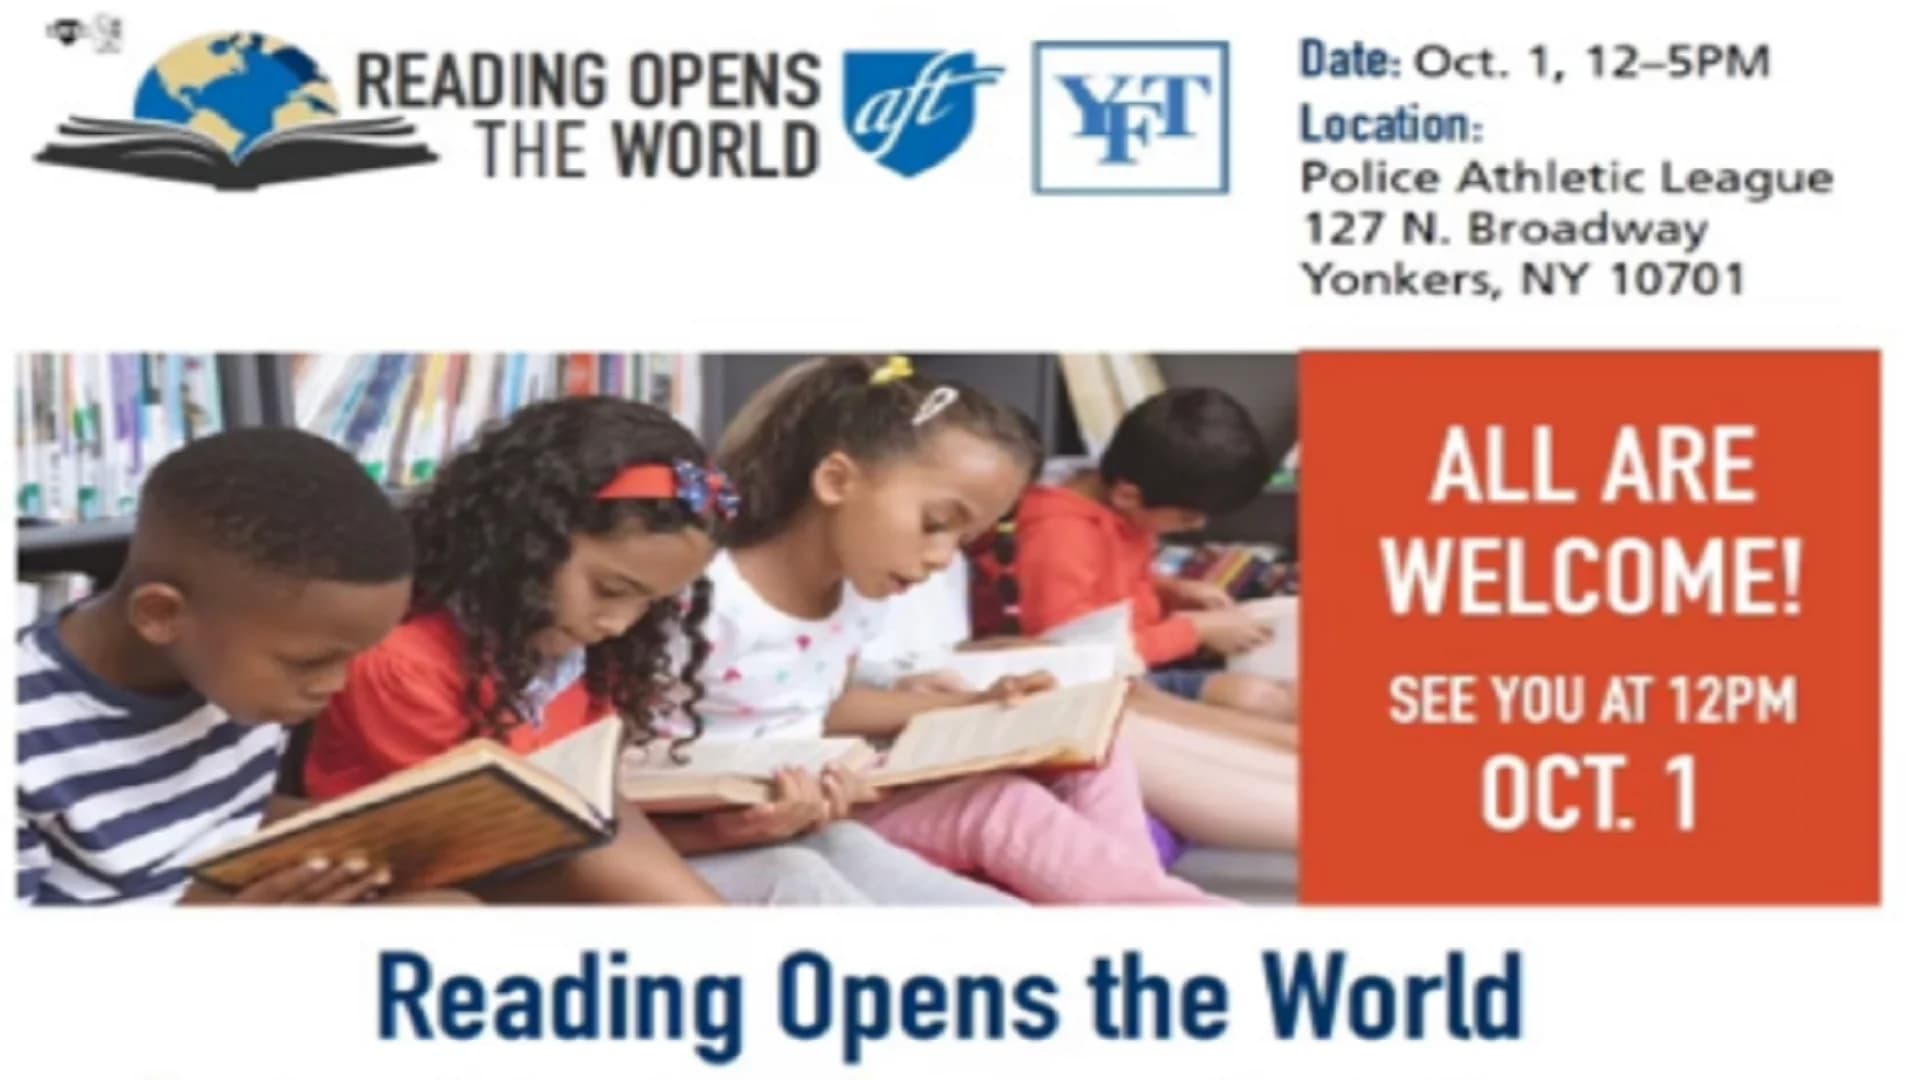 Book giveaway this weekend in Yonkers for students and educators